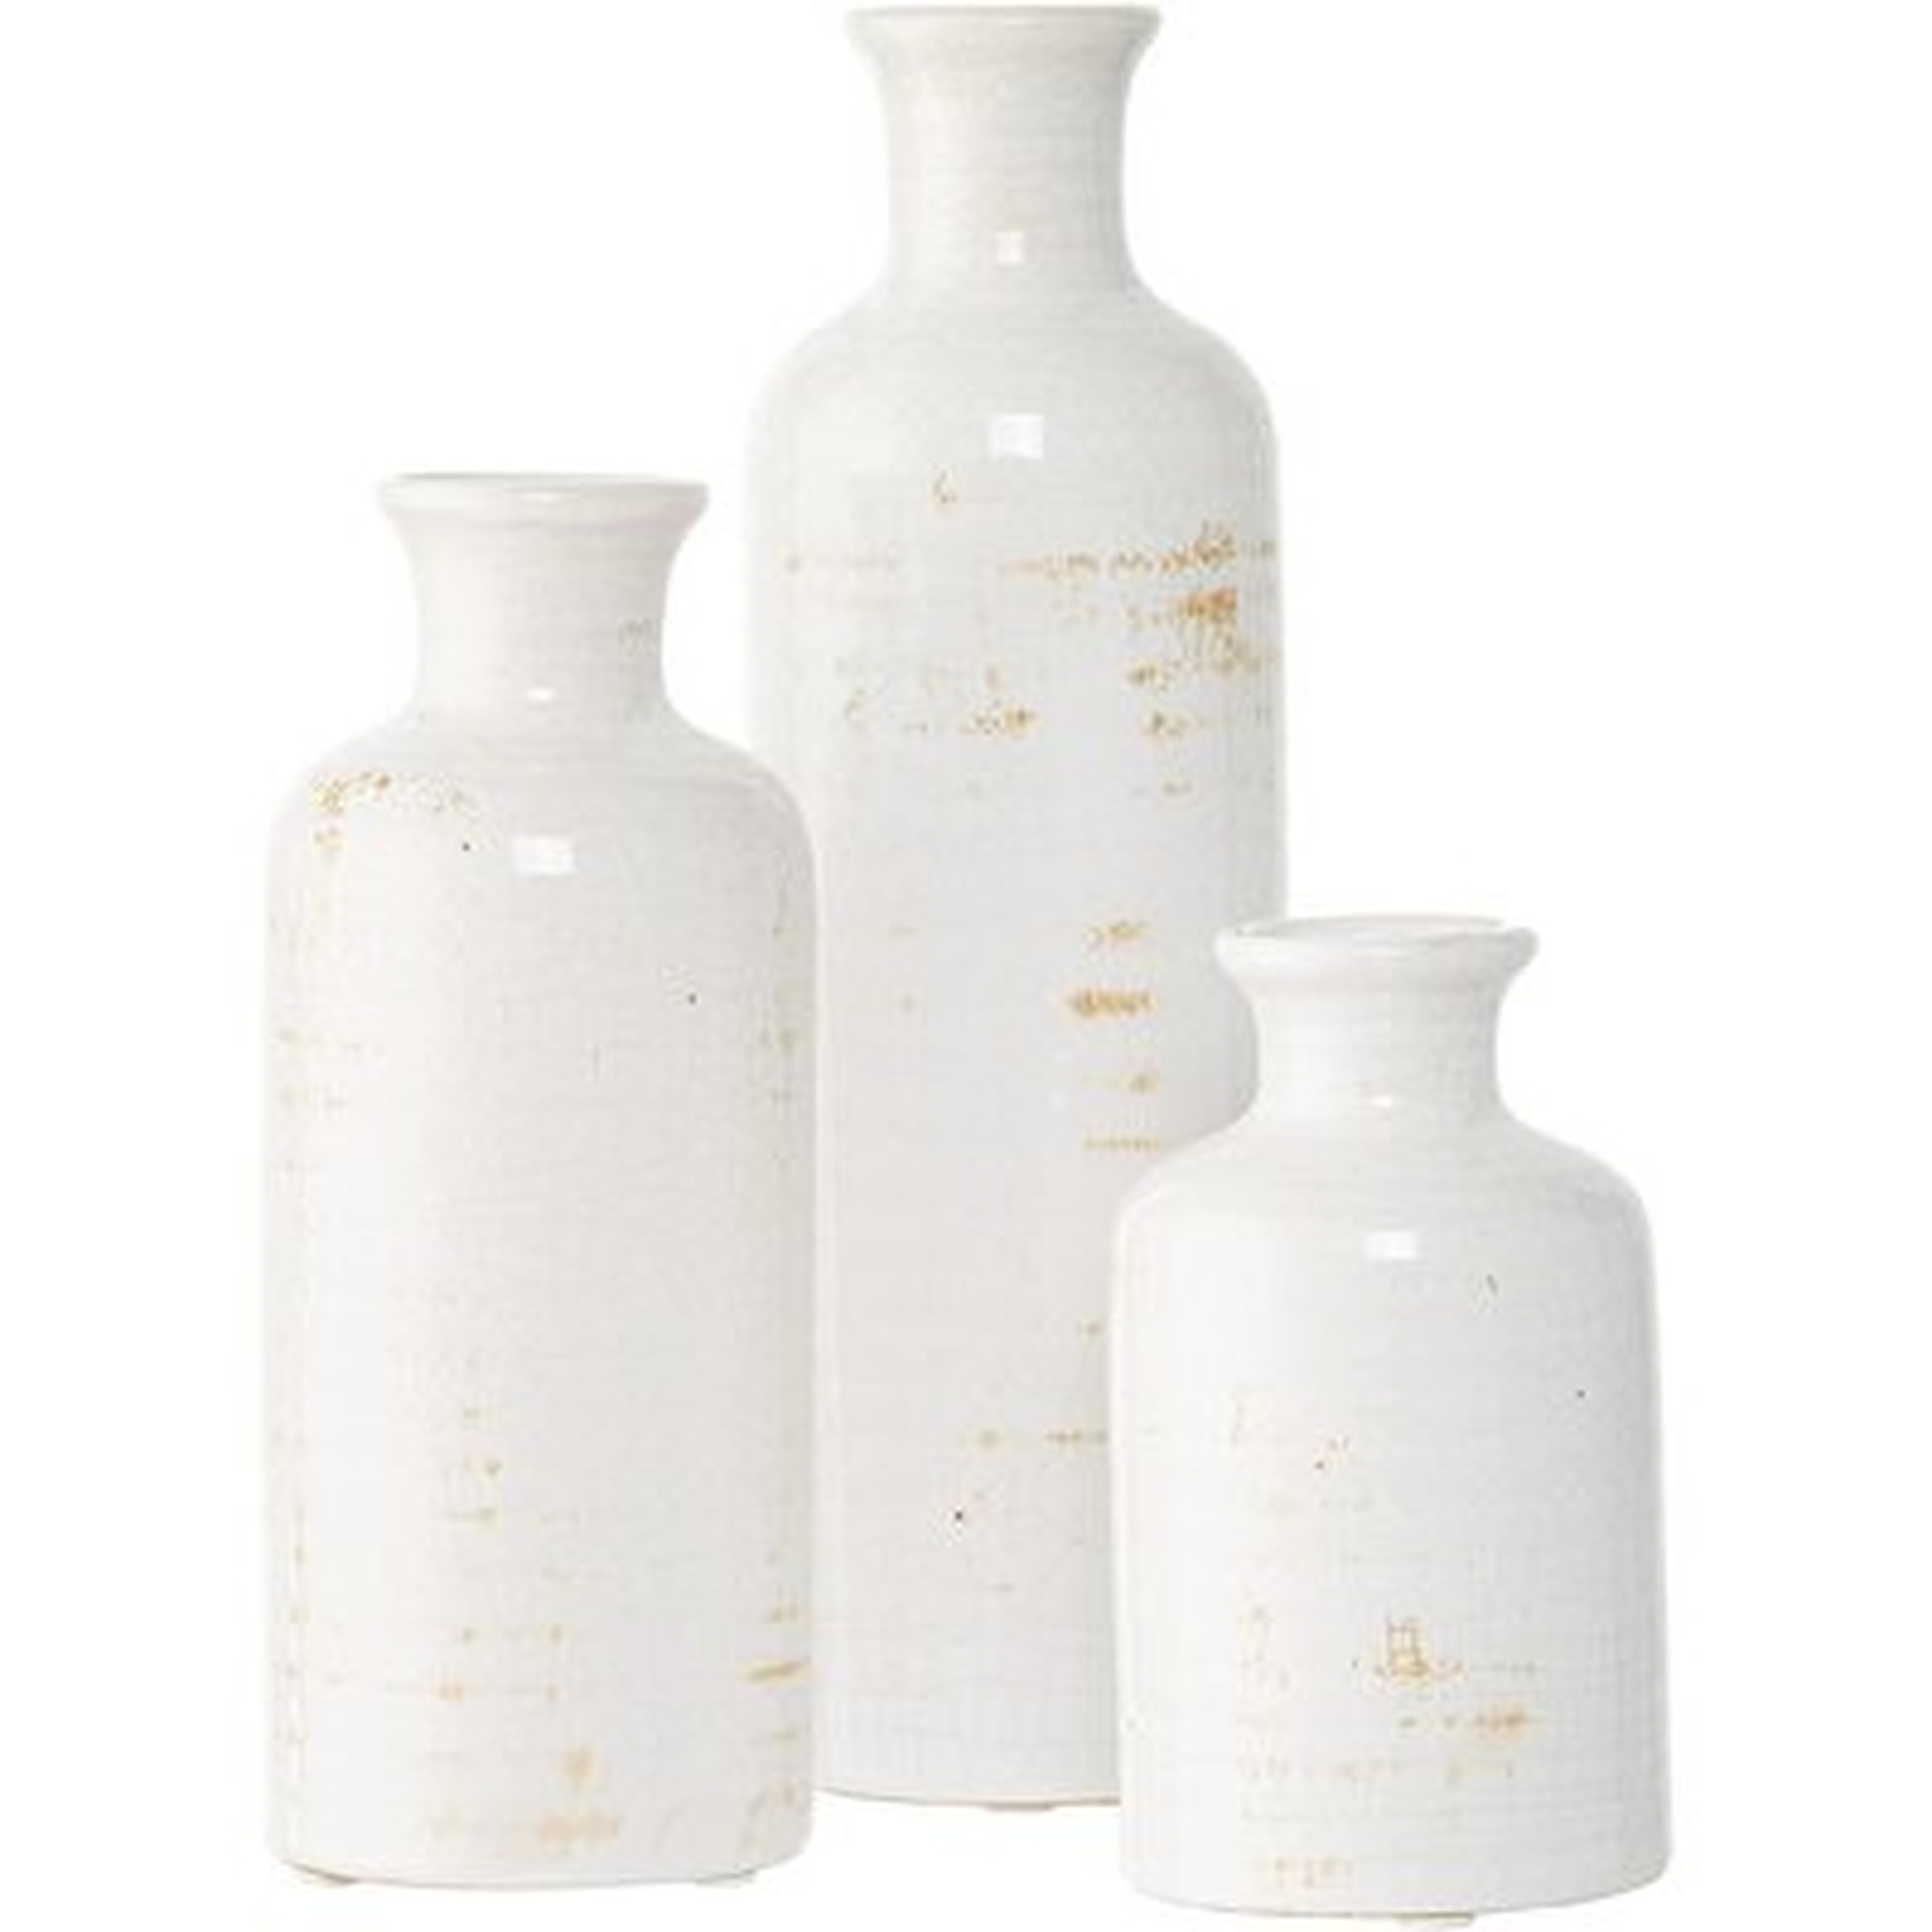 Ceramic Vase Set For Home Decor, Table, Bookshelf, Entryway - Ideal For Centerpiece Table Decorations And Rustic Living Room Decor - Wayfair